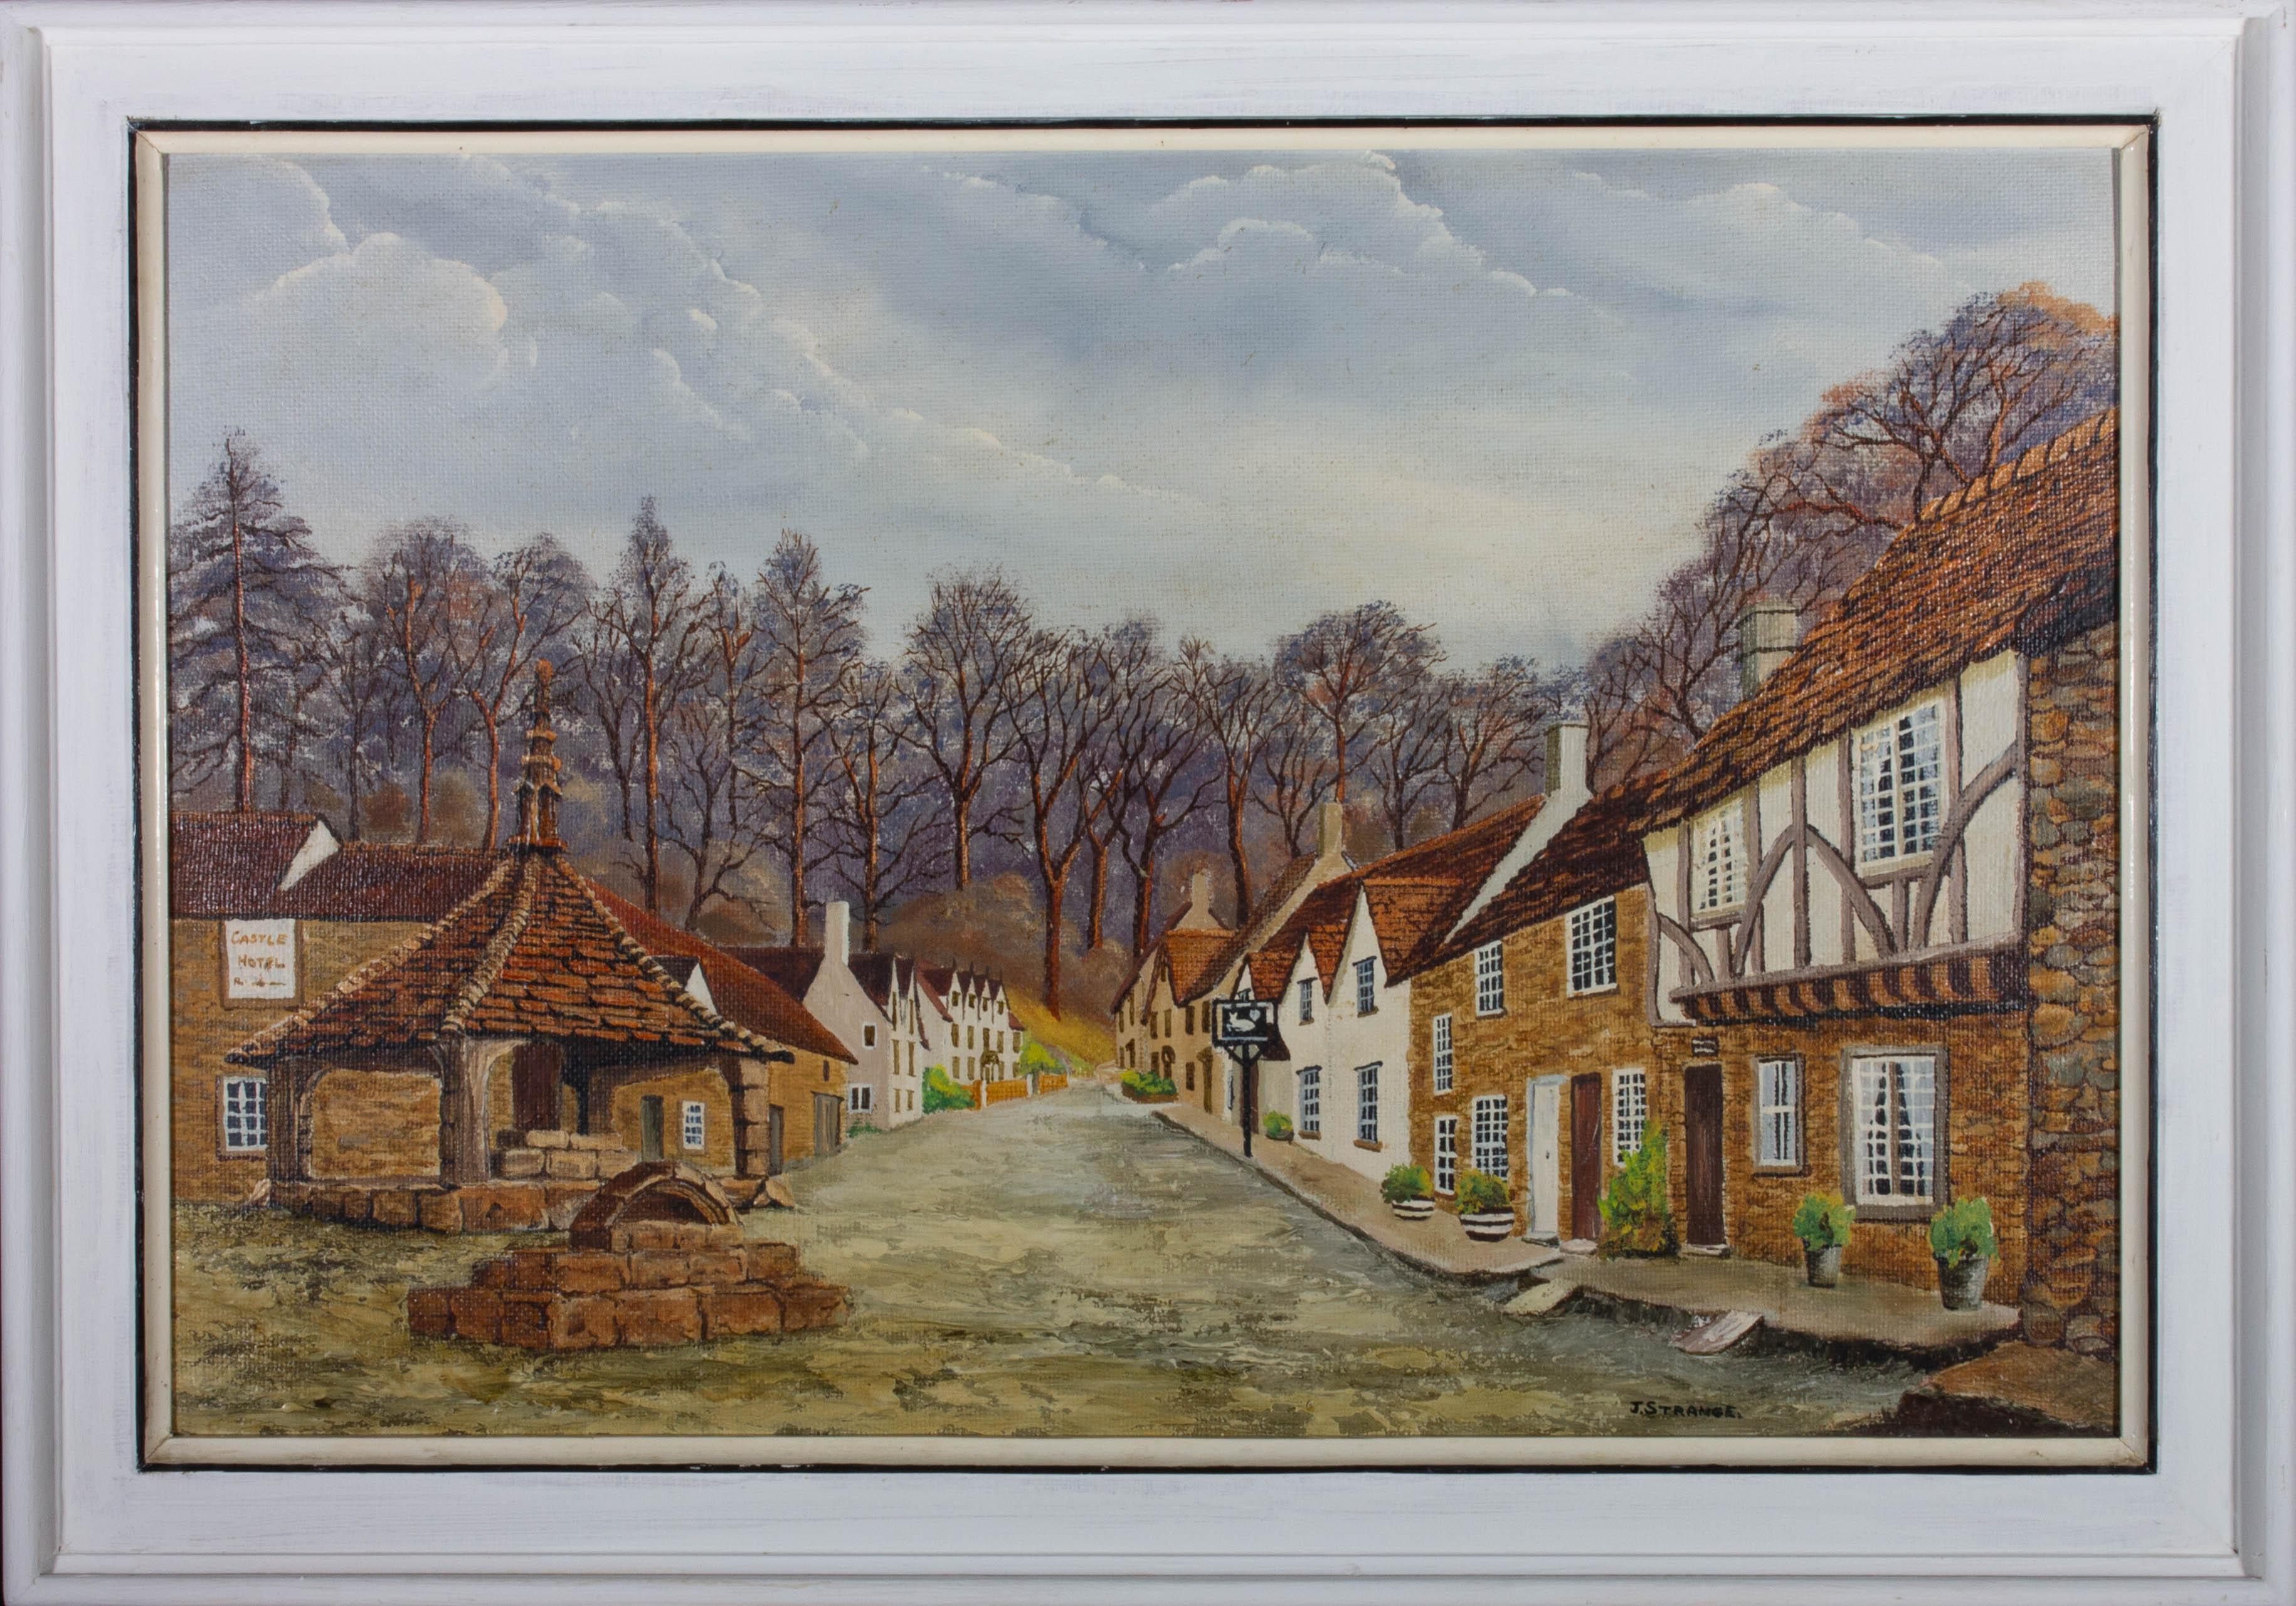 An attractive oil painting by J. Strange, depicting a view in Castle Combe, Wiltshire. Signed to the lower right-hand corner. The title is inscribed on the reverse. Presented in a white wooden frame with an inner detail in black. On board.
